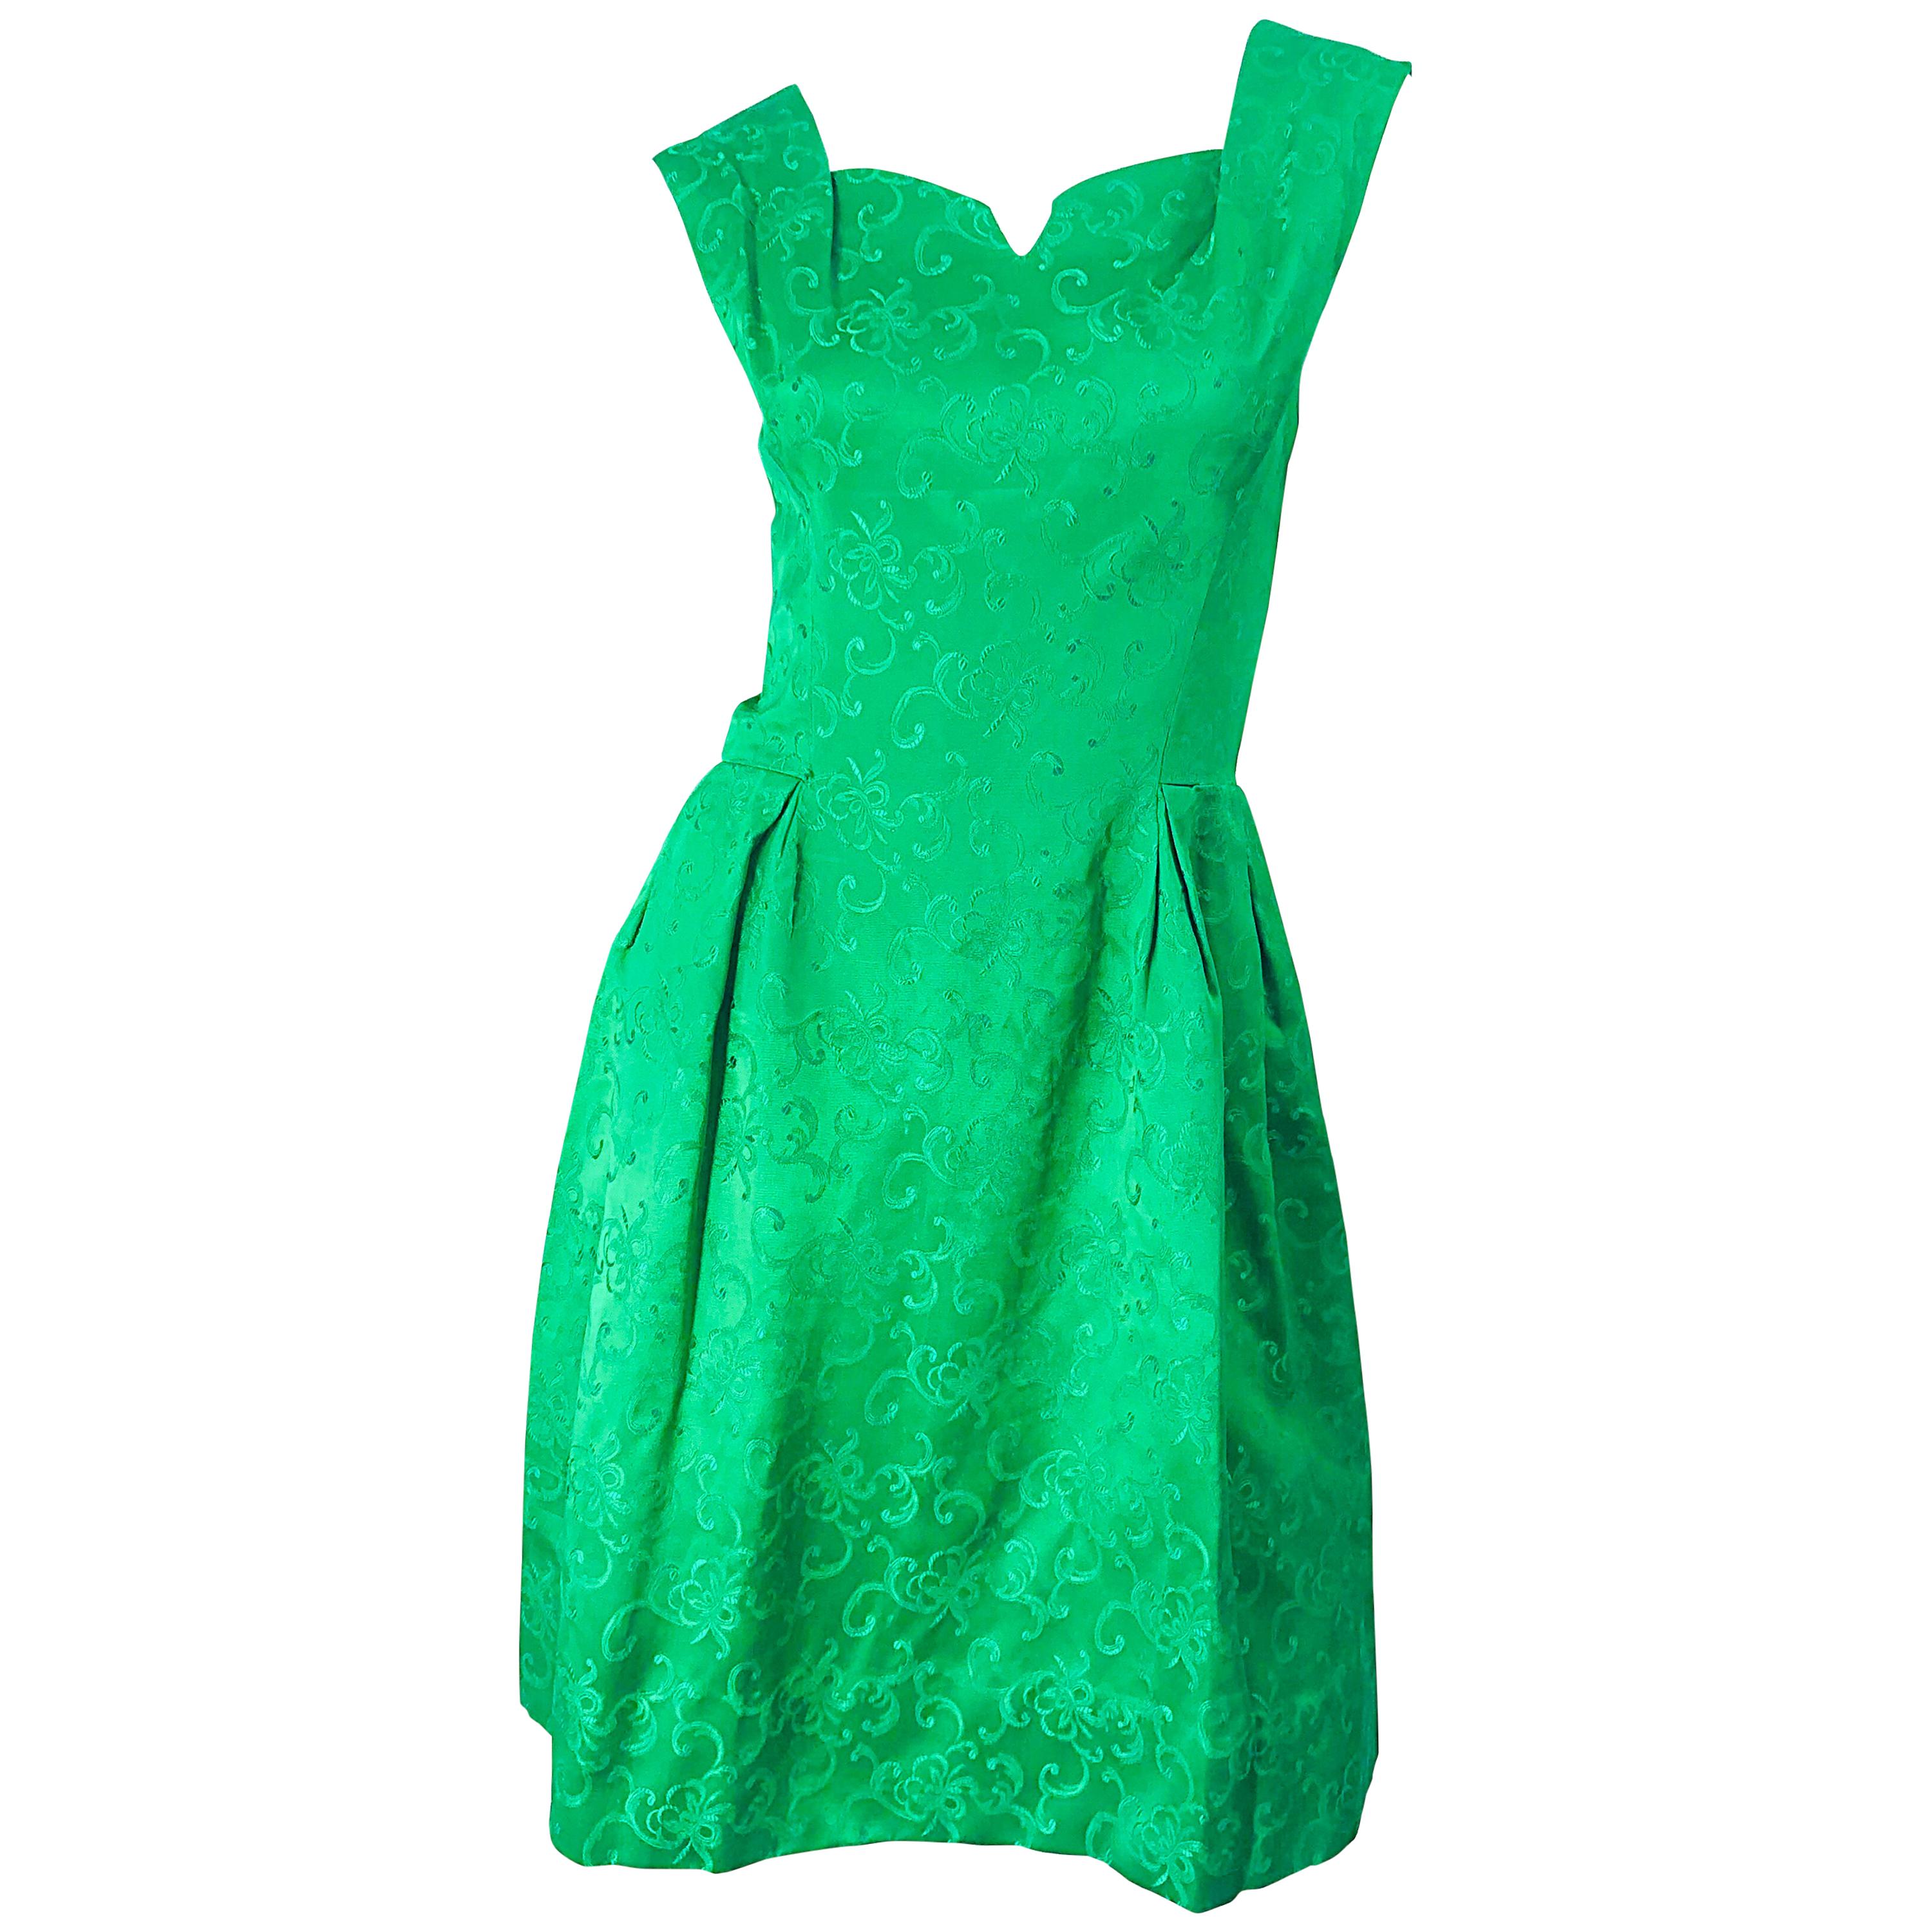 Chic 1960s Kelly Green Silk Damask Sleeveless Vintage 60s A-Line Dress For Sale